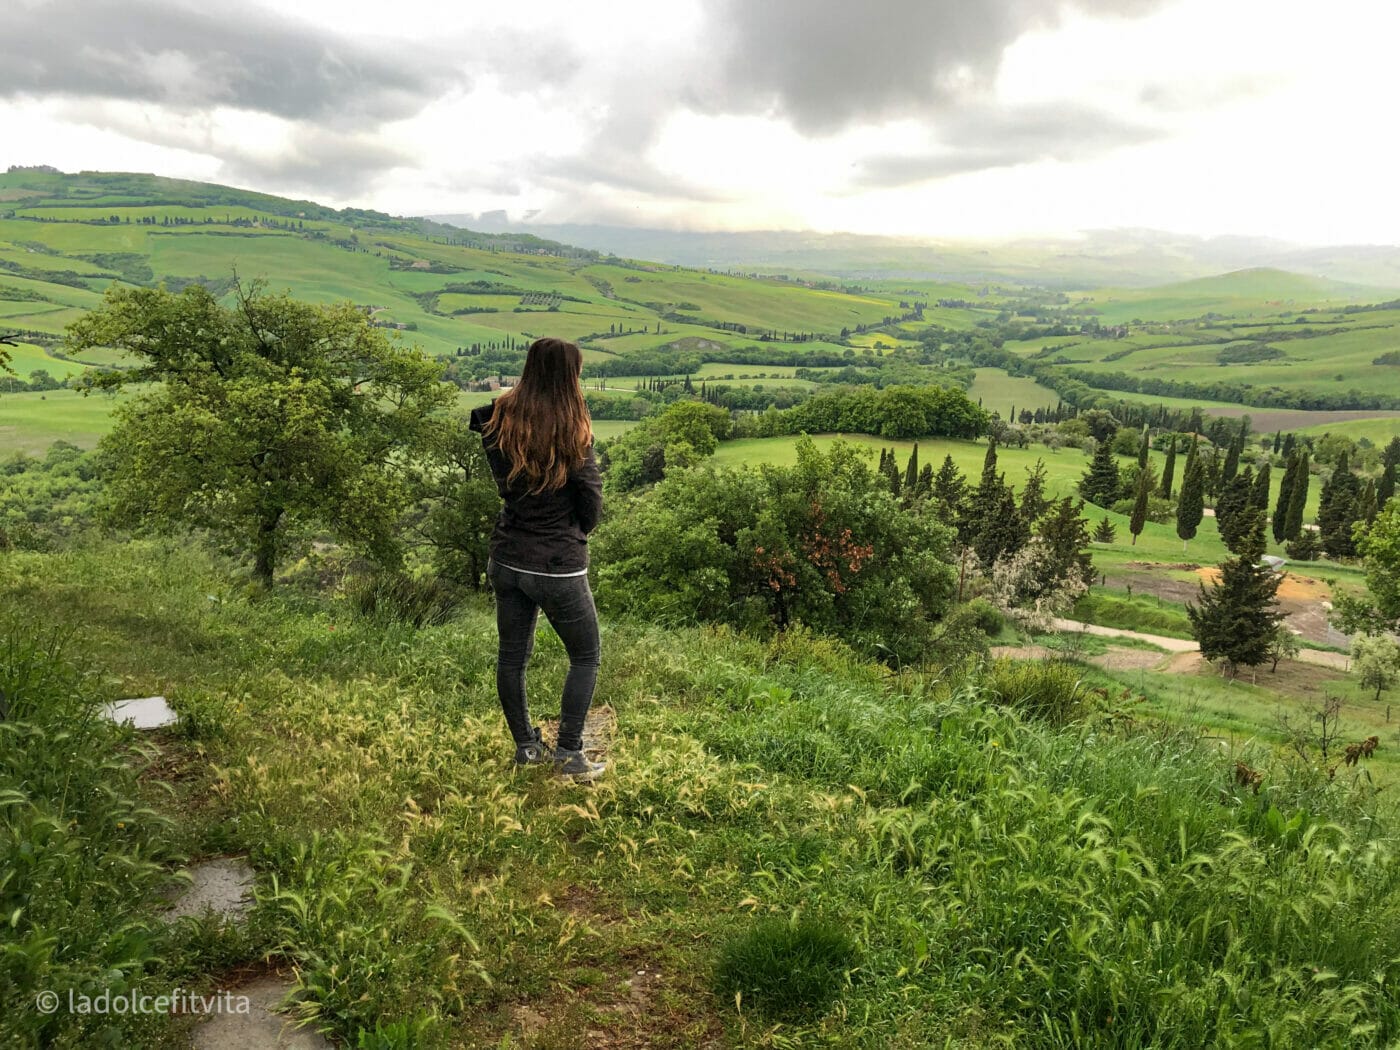 woman gazing out on the lush green couyntryside below from atop a hill in Tuscany